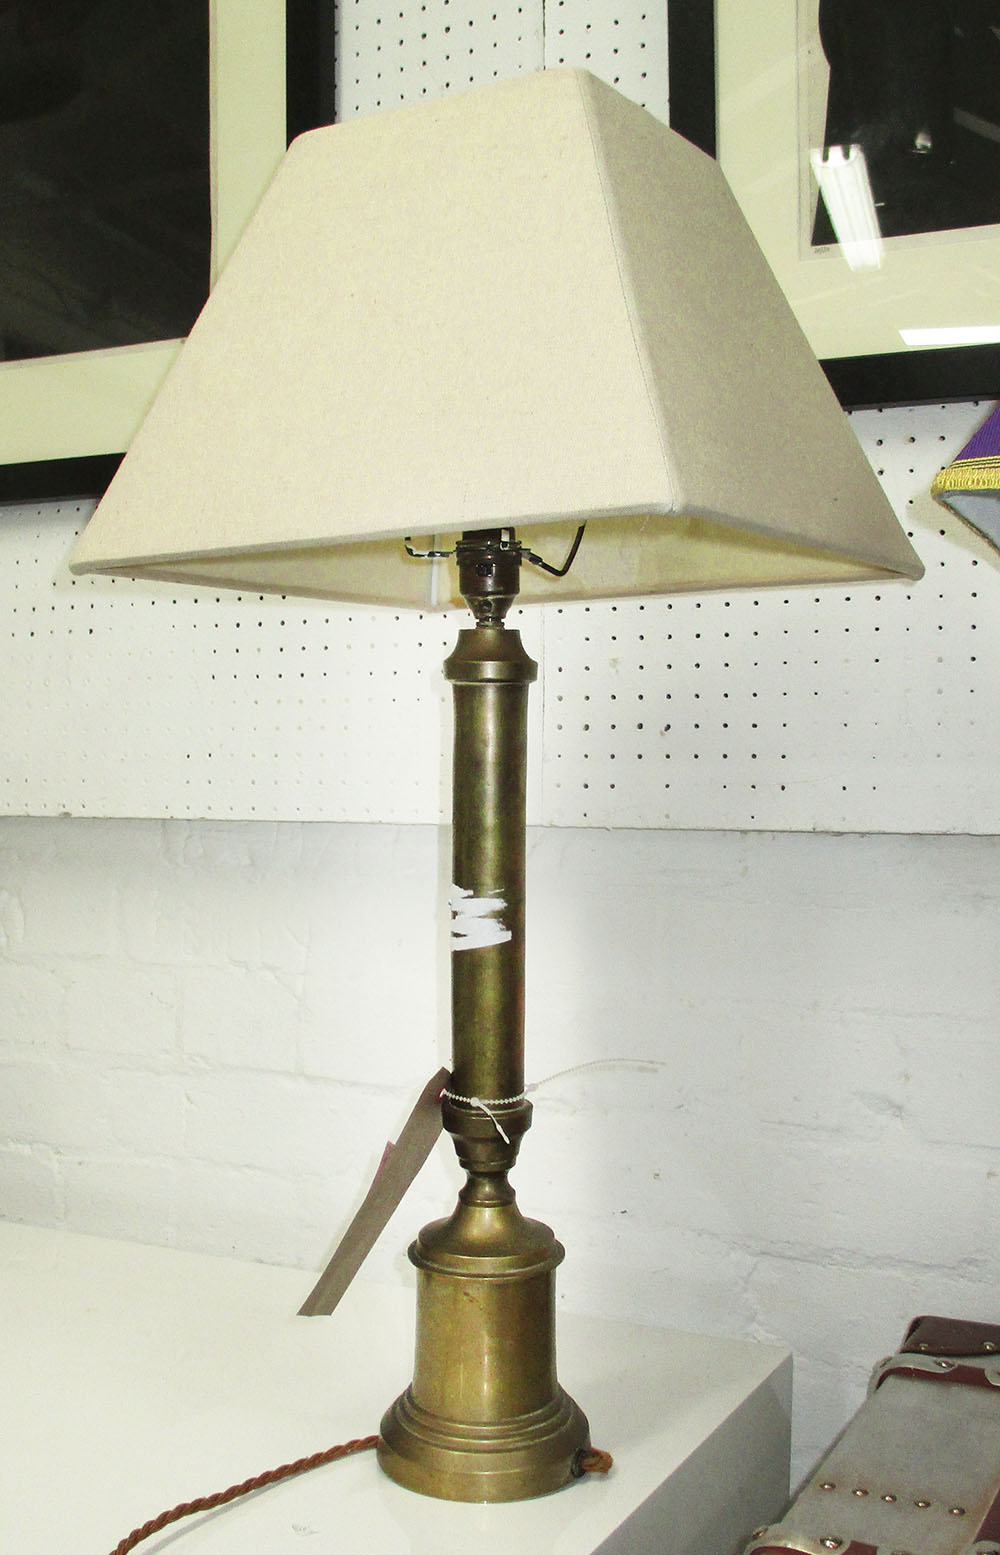 TABLE LAMP, column type in brass with shade, 66cm H.